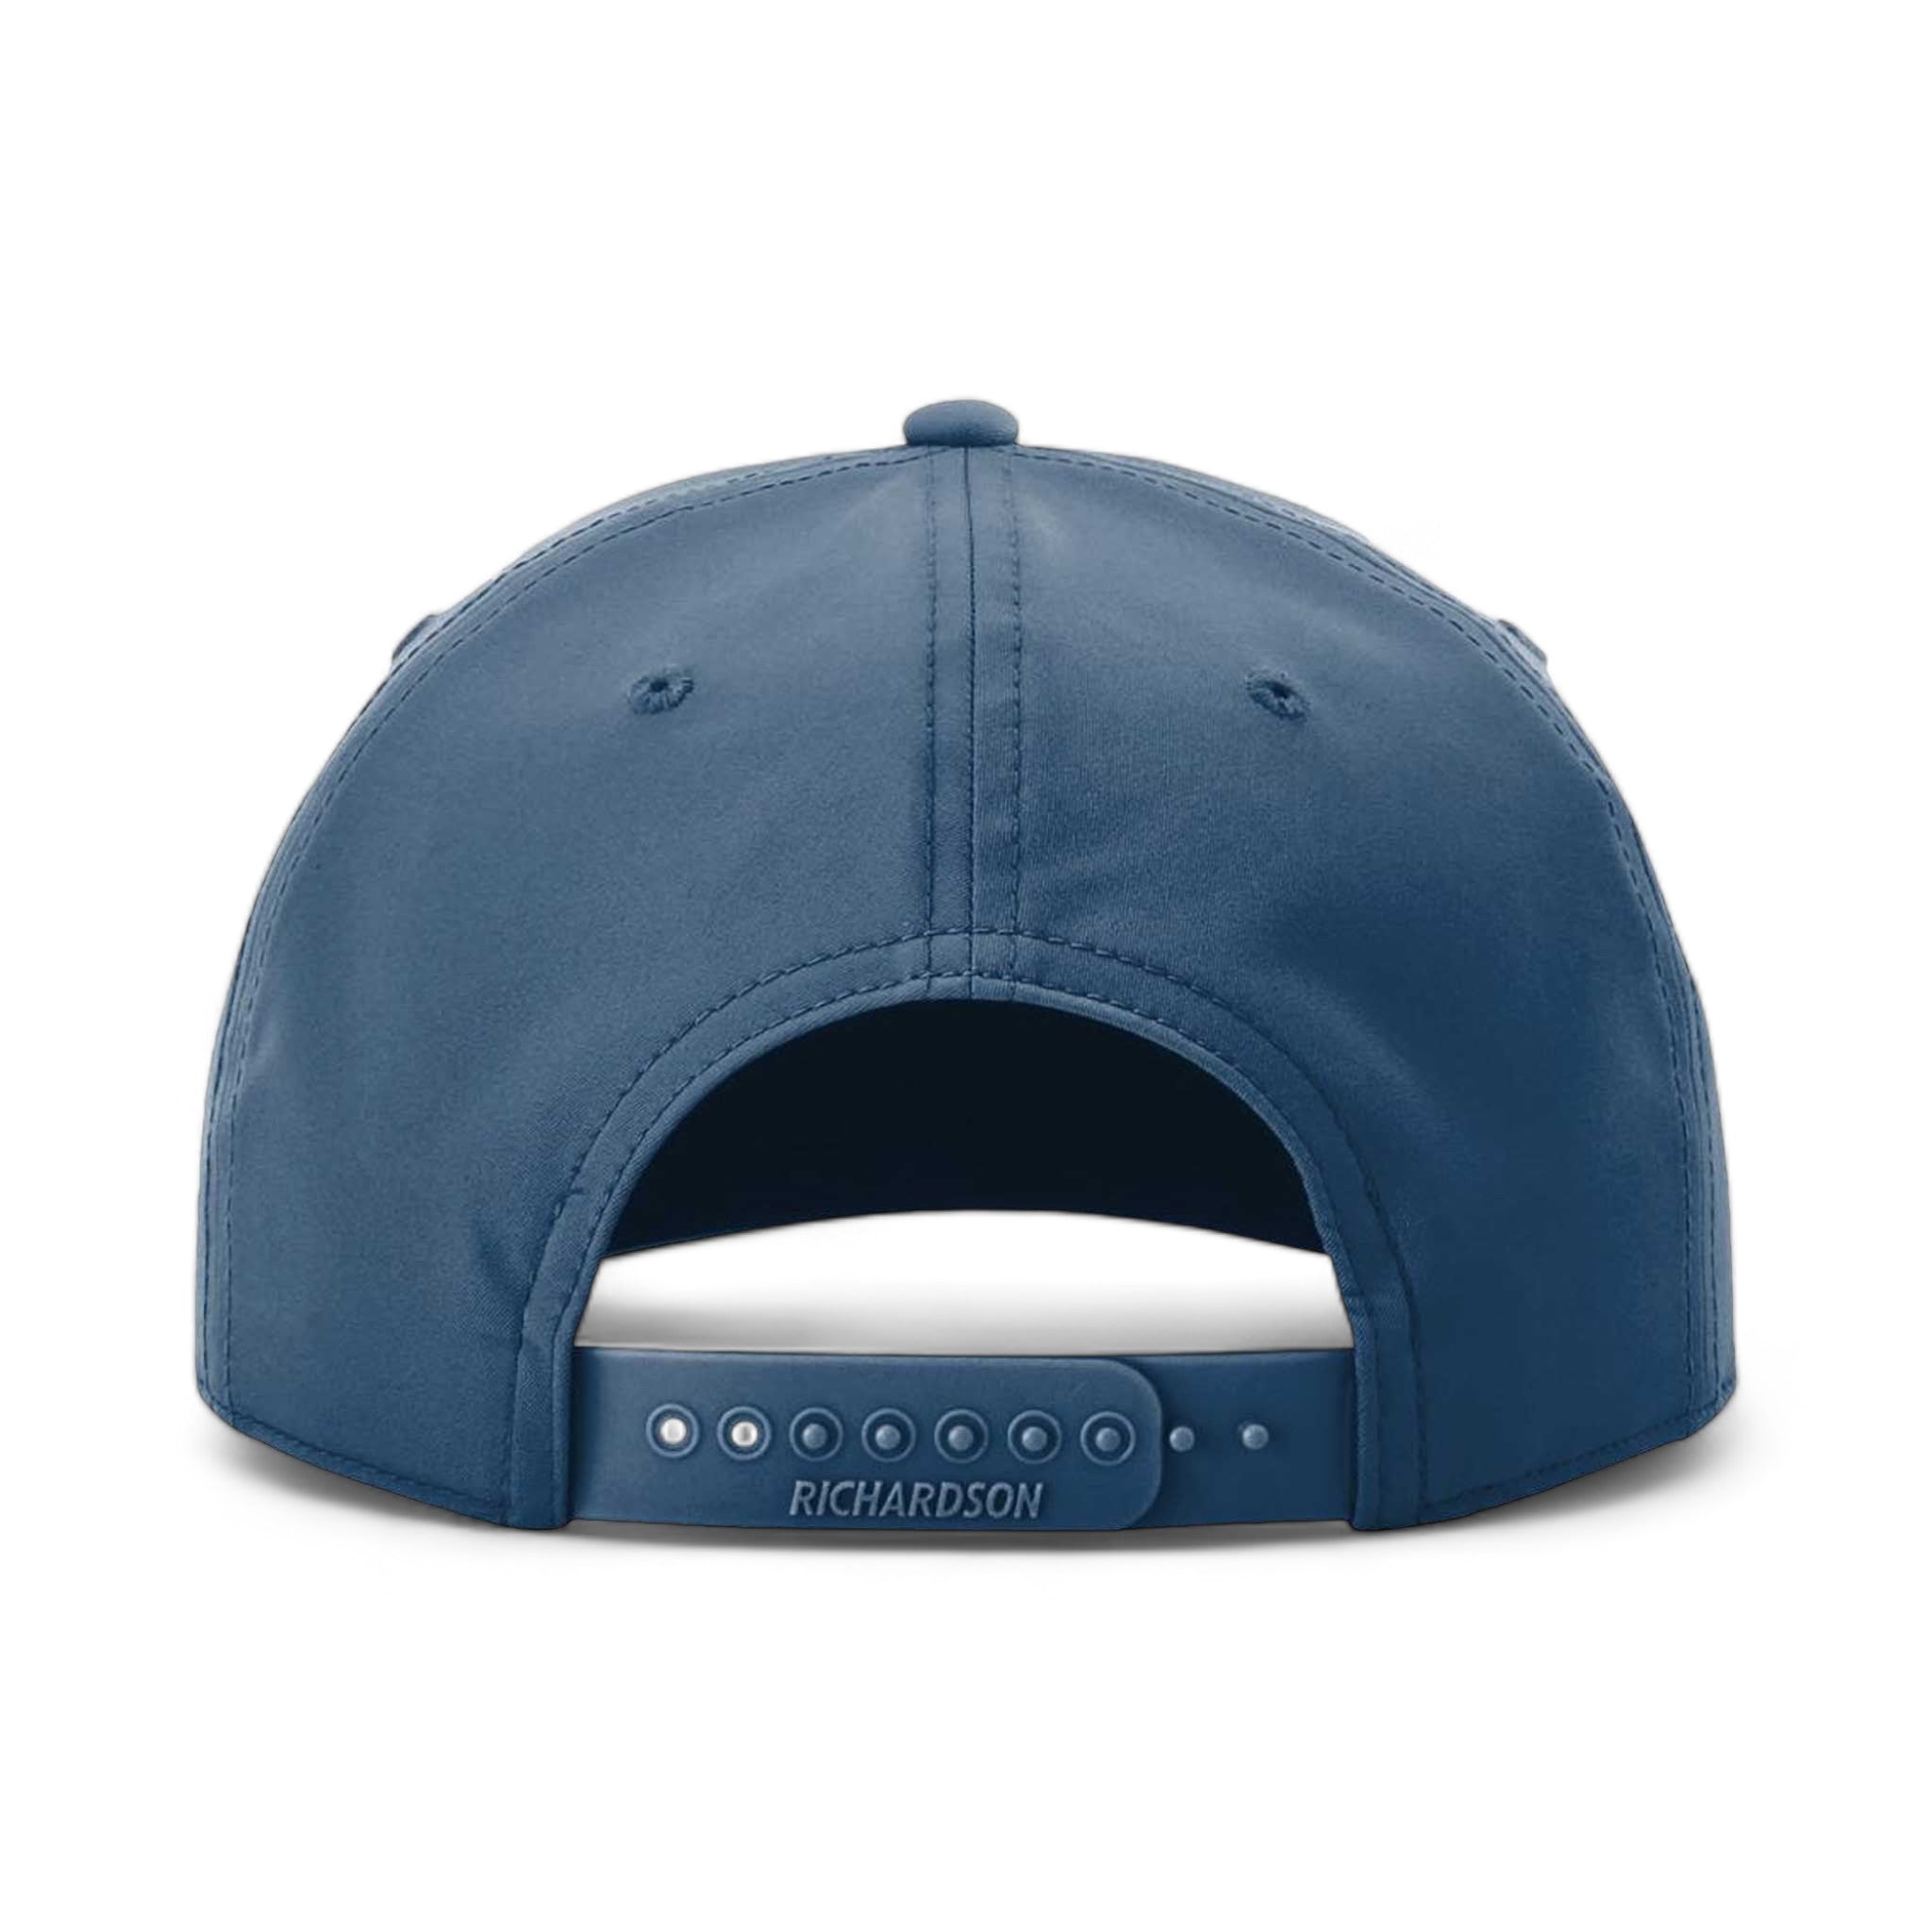 Back view of Richardson 258 custom hat in light blue and white